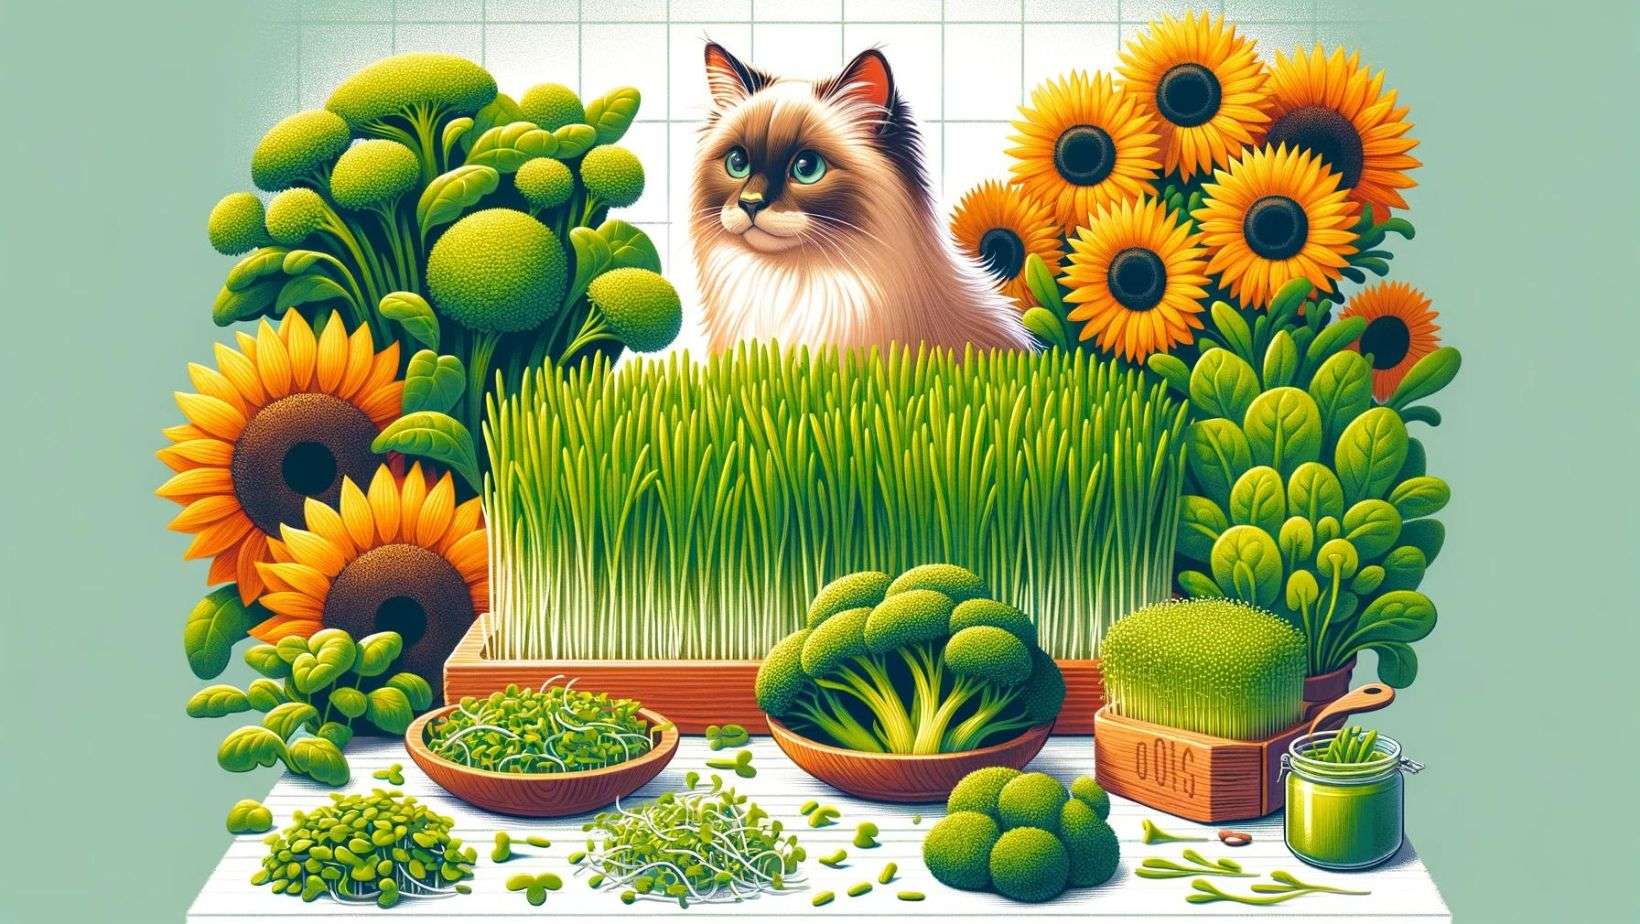 An illustration showing a variety of microgreens like wheatgrass, broccoli, kale, and sunflower, each labeled, surrounding a curious cat exploring the greens.